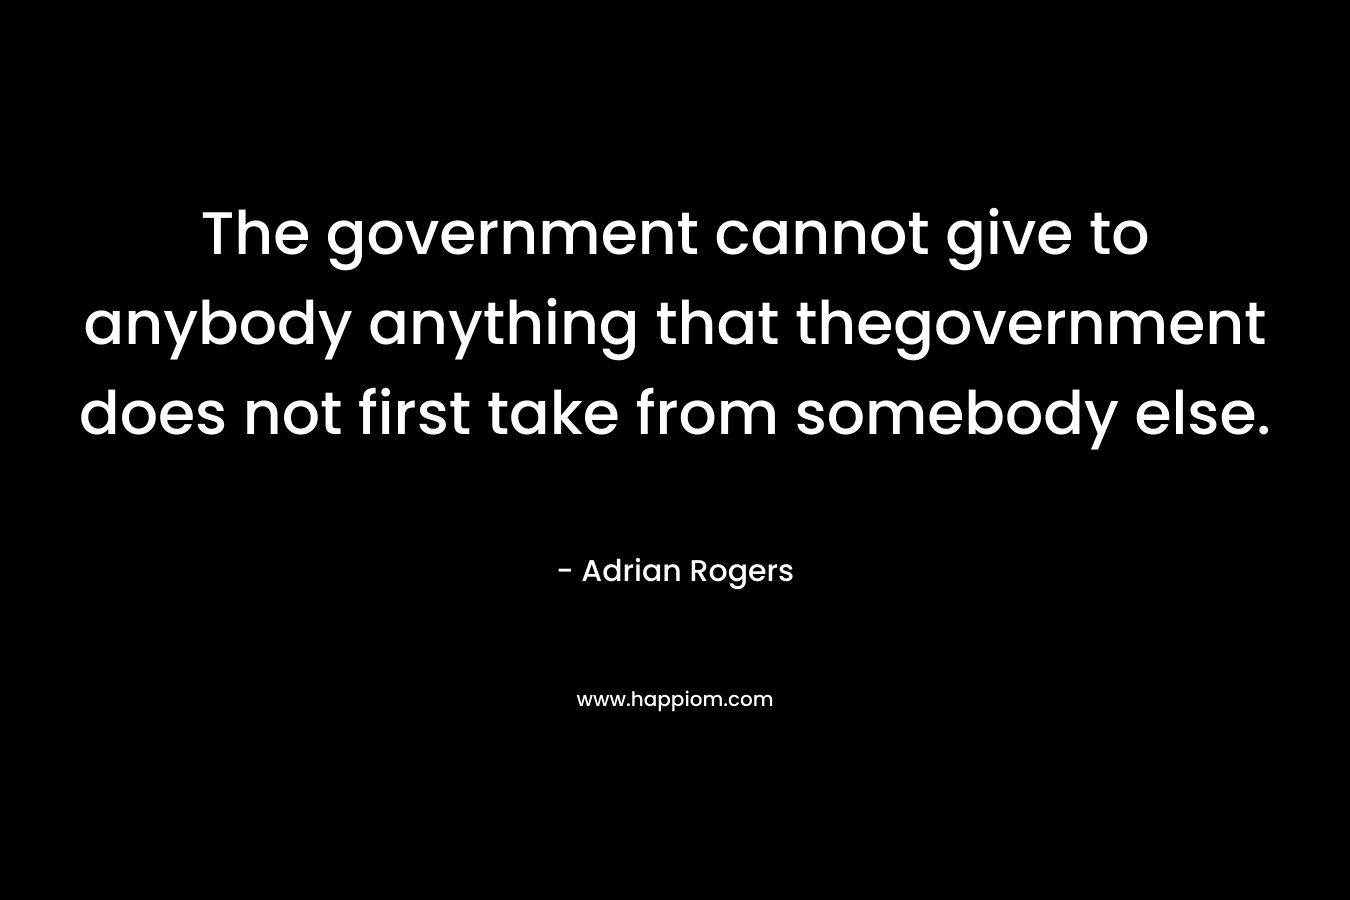 The government cannot give to anybody anything that thegovernment does not first take from somebody else.